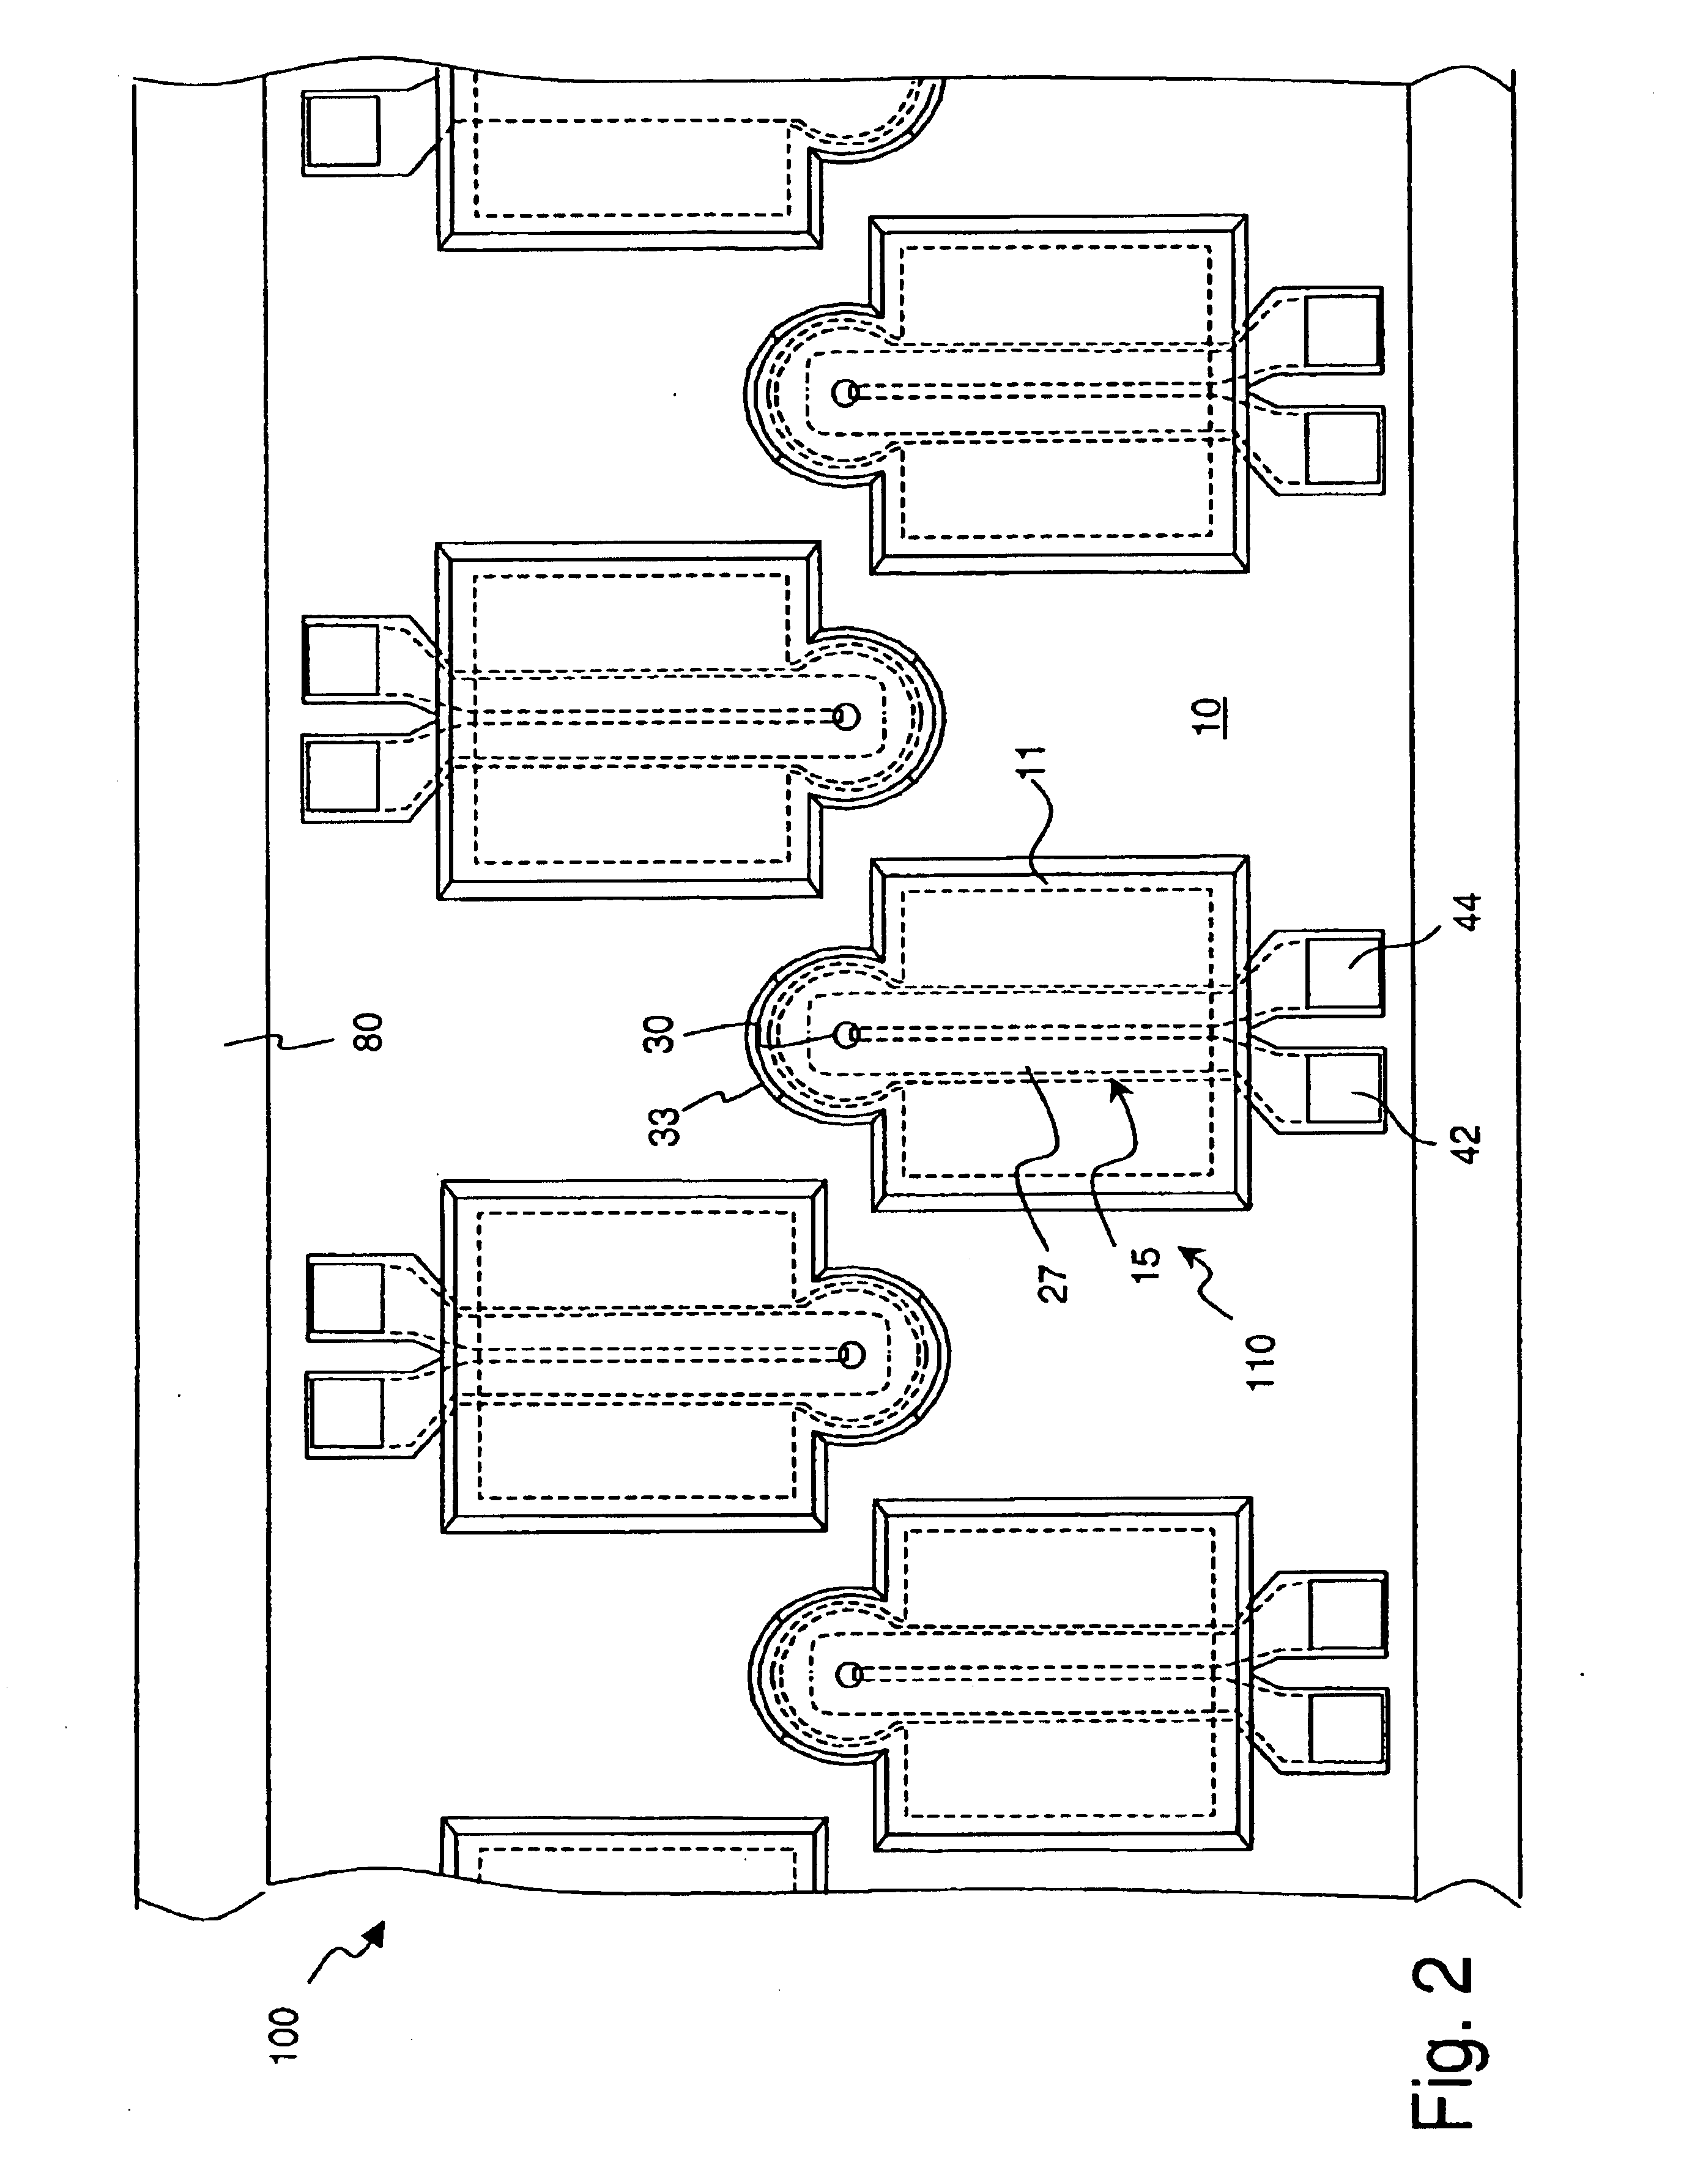 Thermo-mechanical actuator drop-on-demand apparatus and method with multiple drop volumes